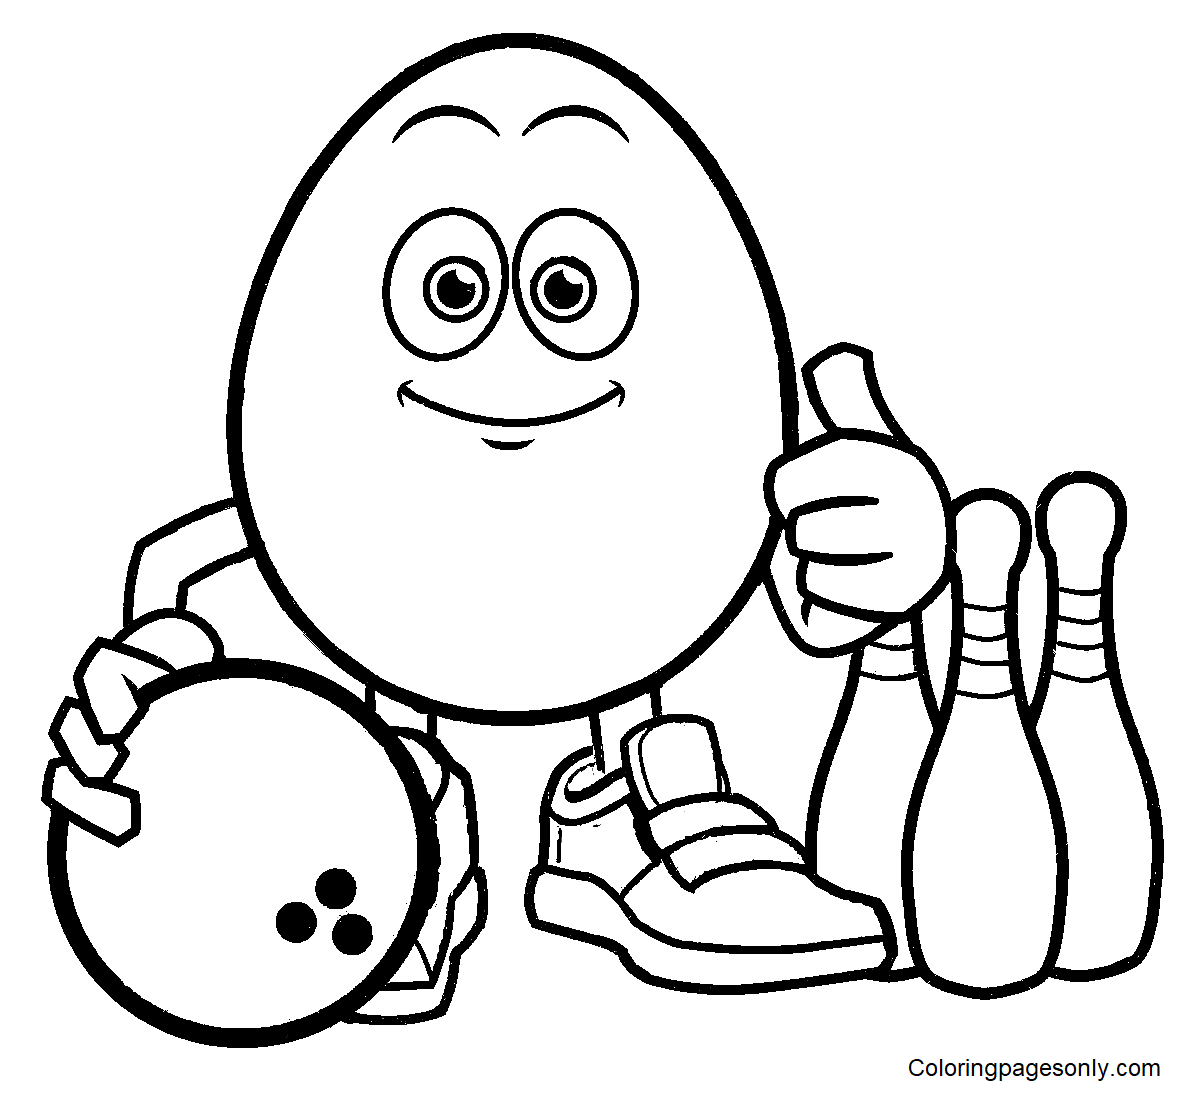 Egg Playing Bowling Coloring Page